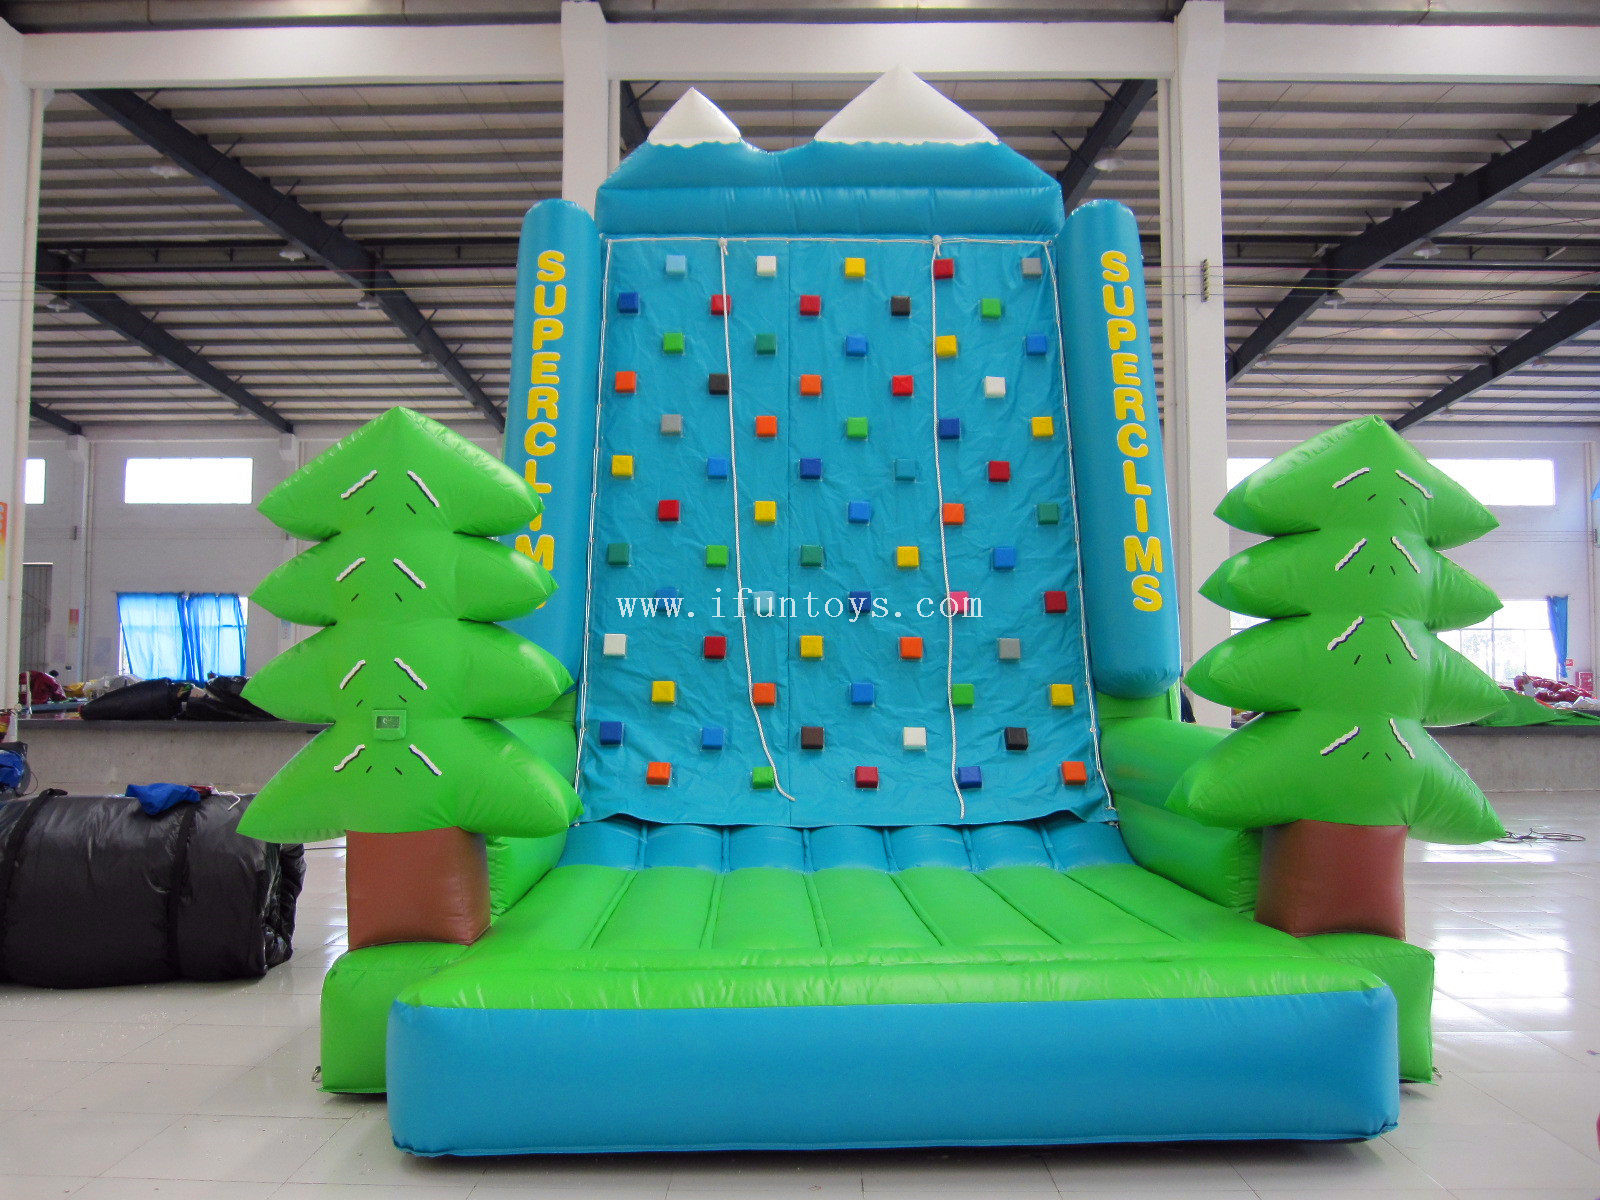 New finished yellow color commercial Inflatable playgrounds rock climbing wall for sport games